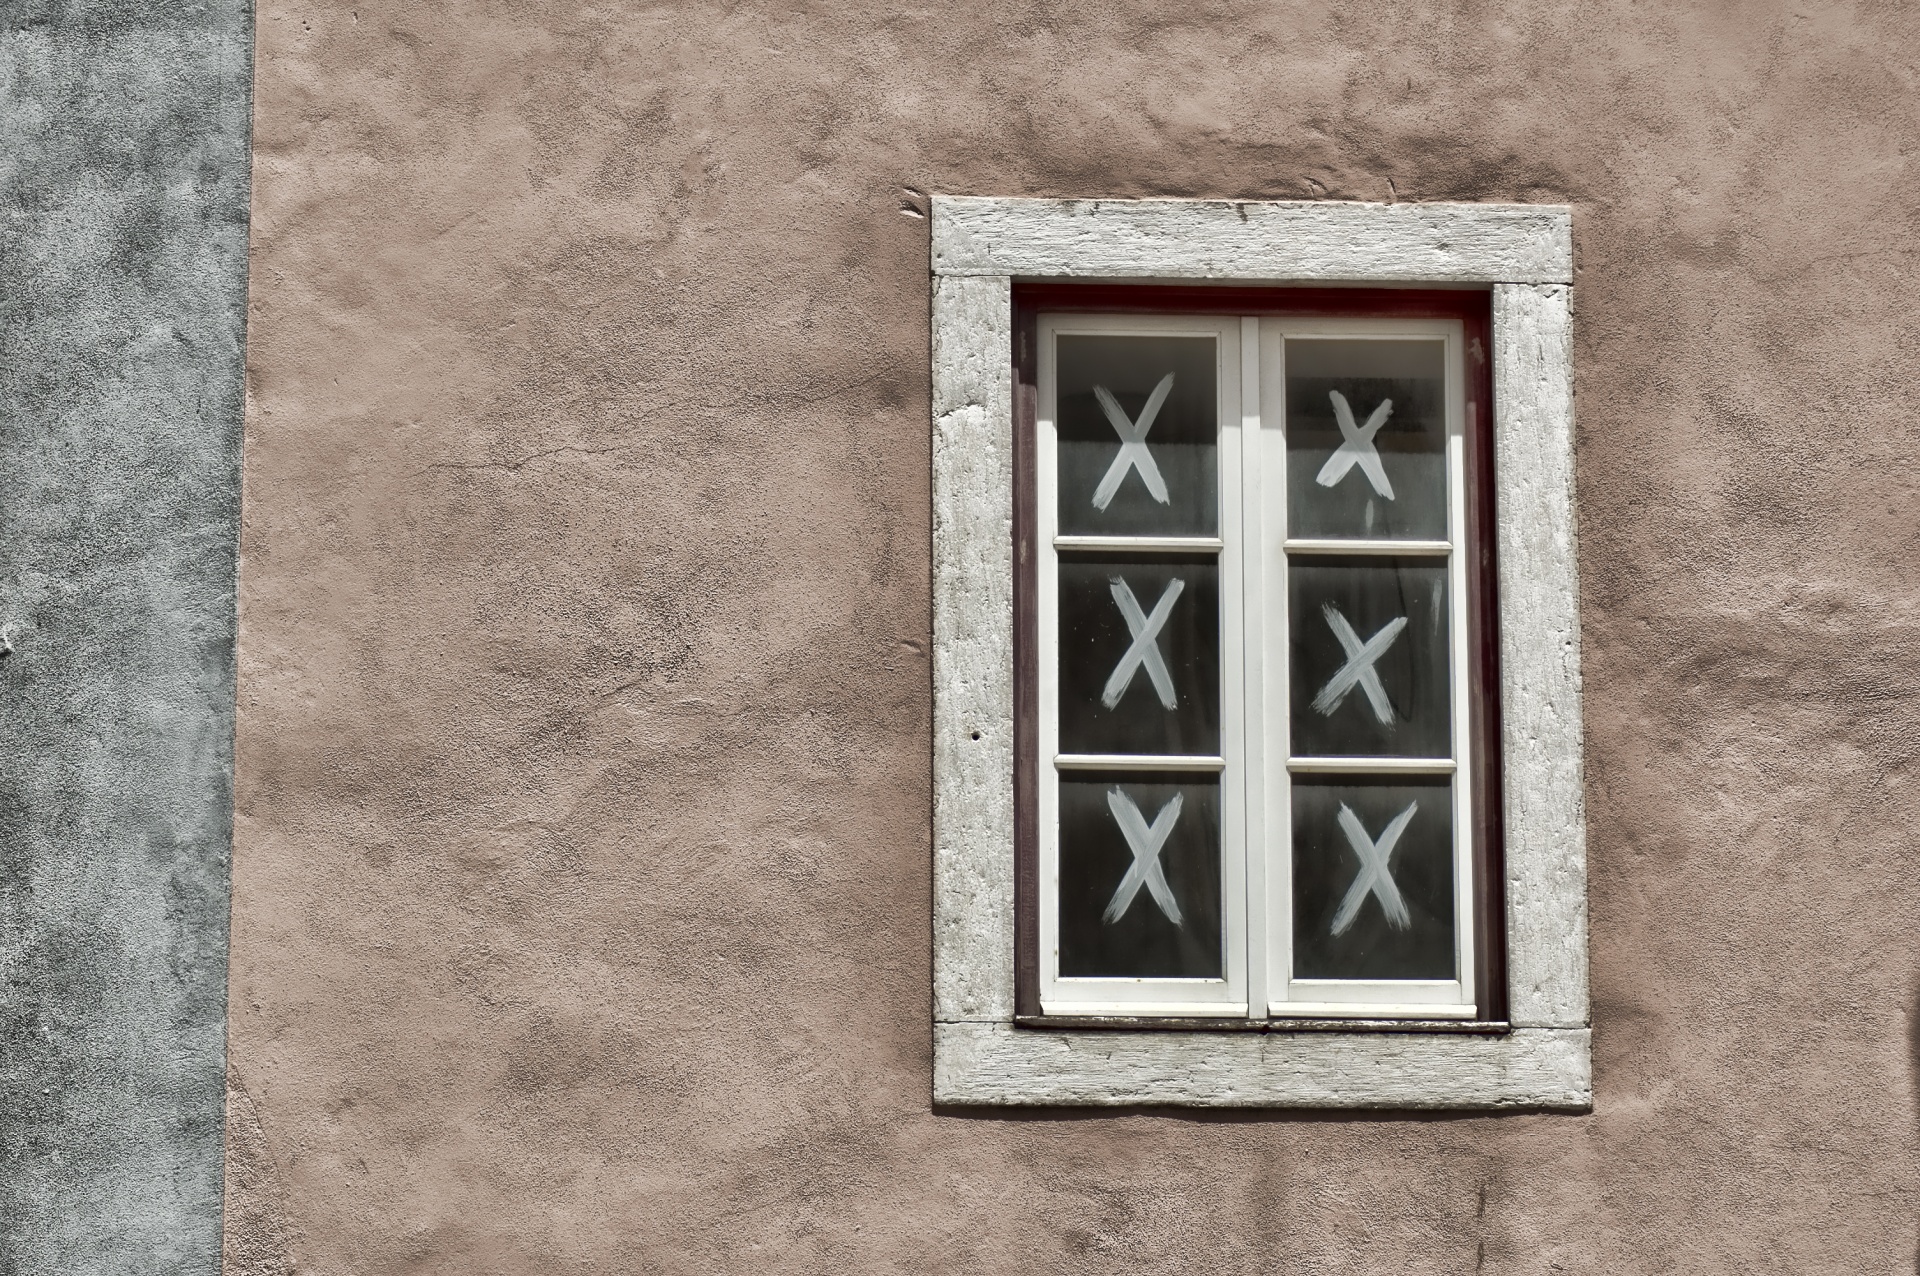 Window with crosses in the windows.